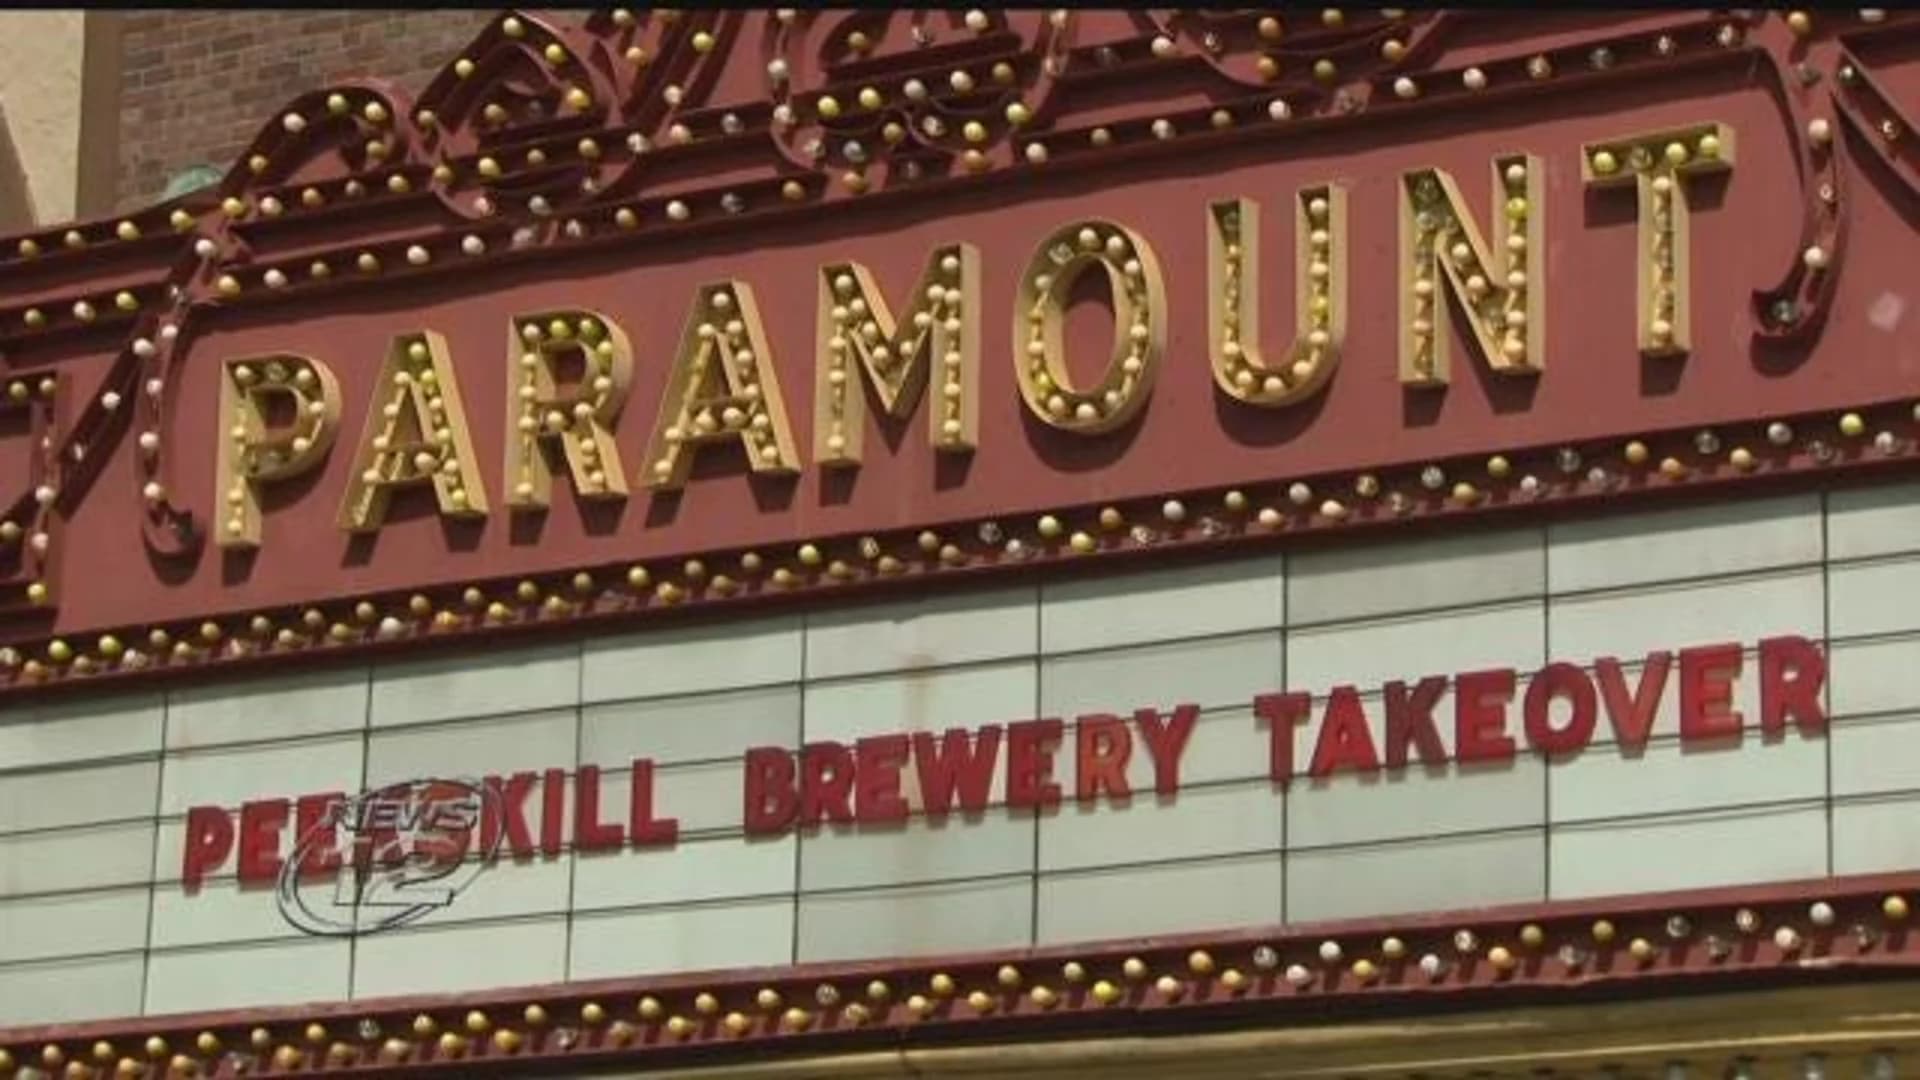 Peekskill restaurateur takes leading role to save Paramount Theater